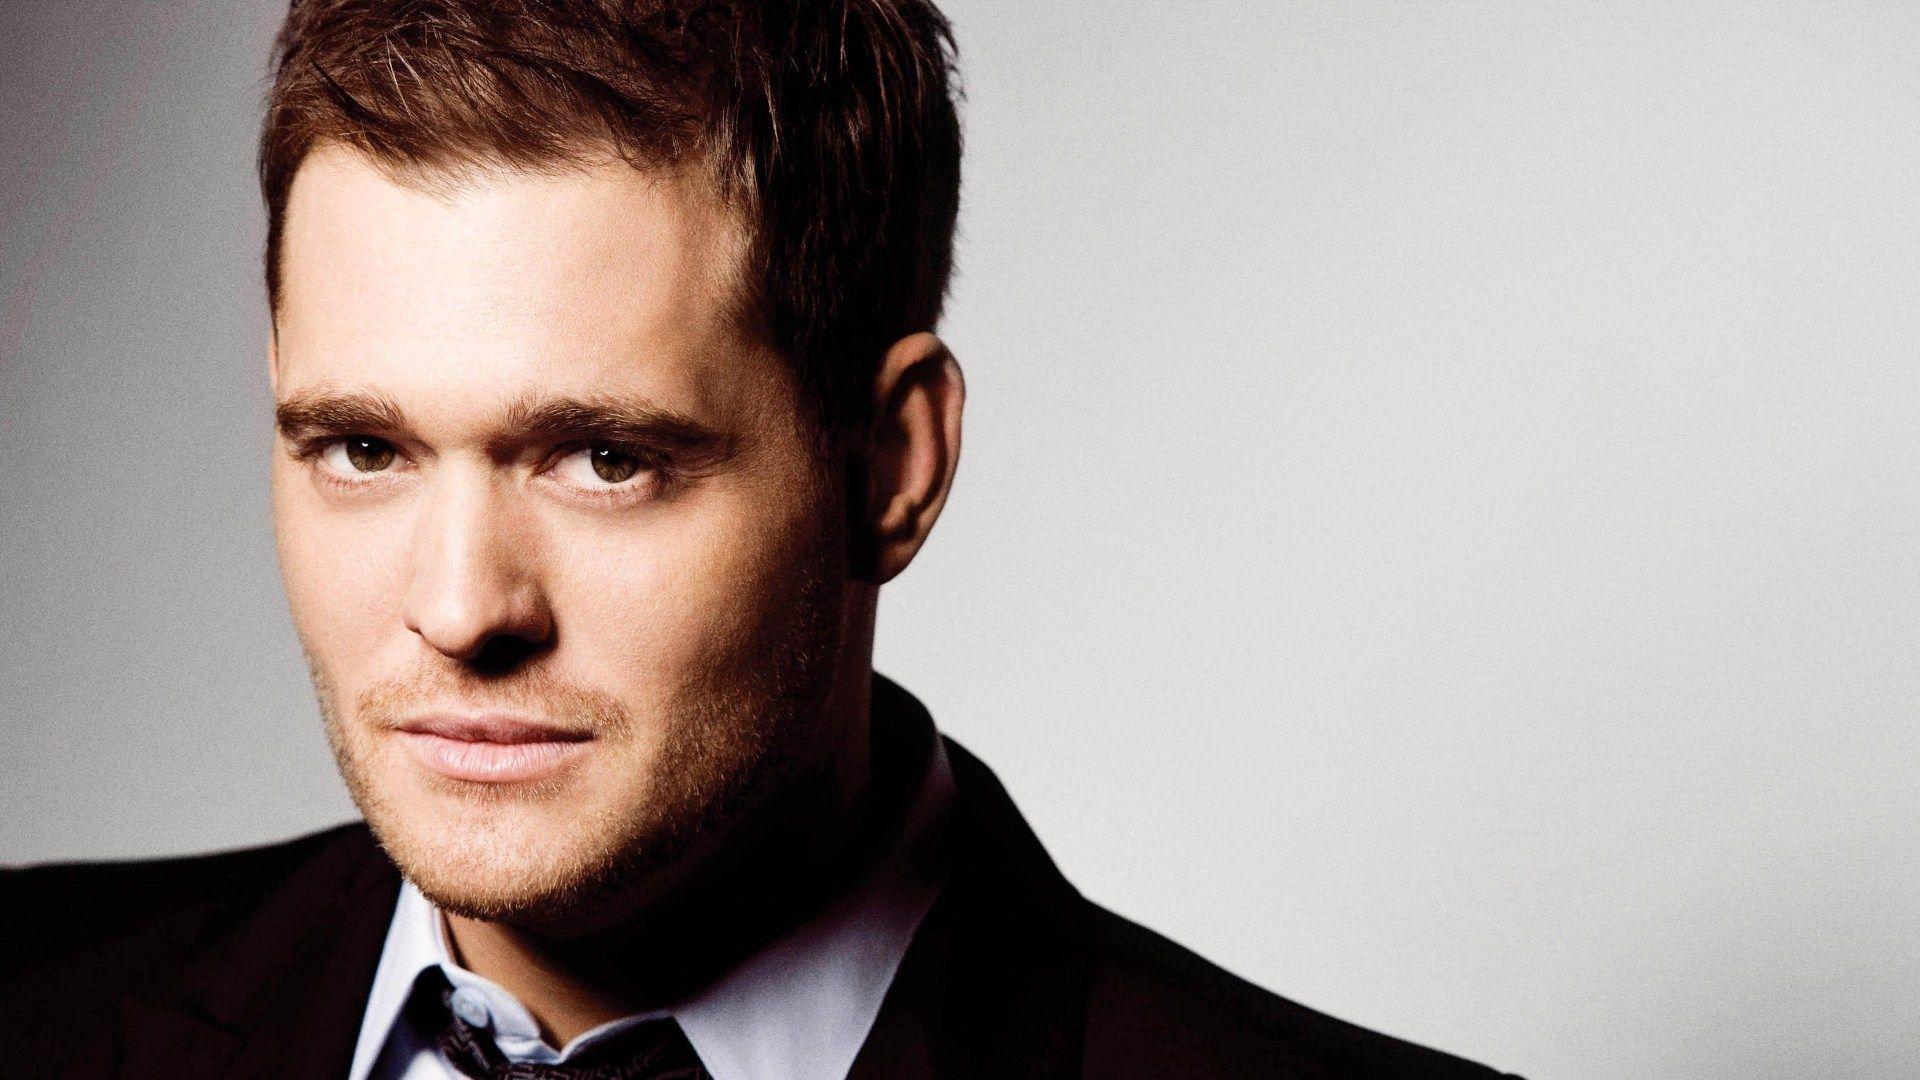 Michael Bublé Full HD Wallpaper and Backgroundx1080